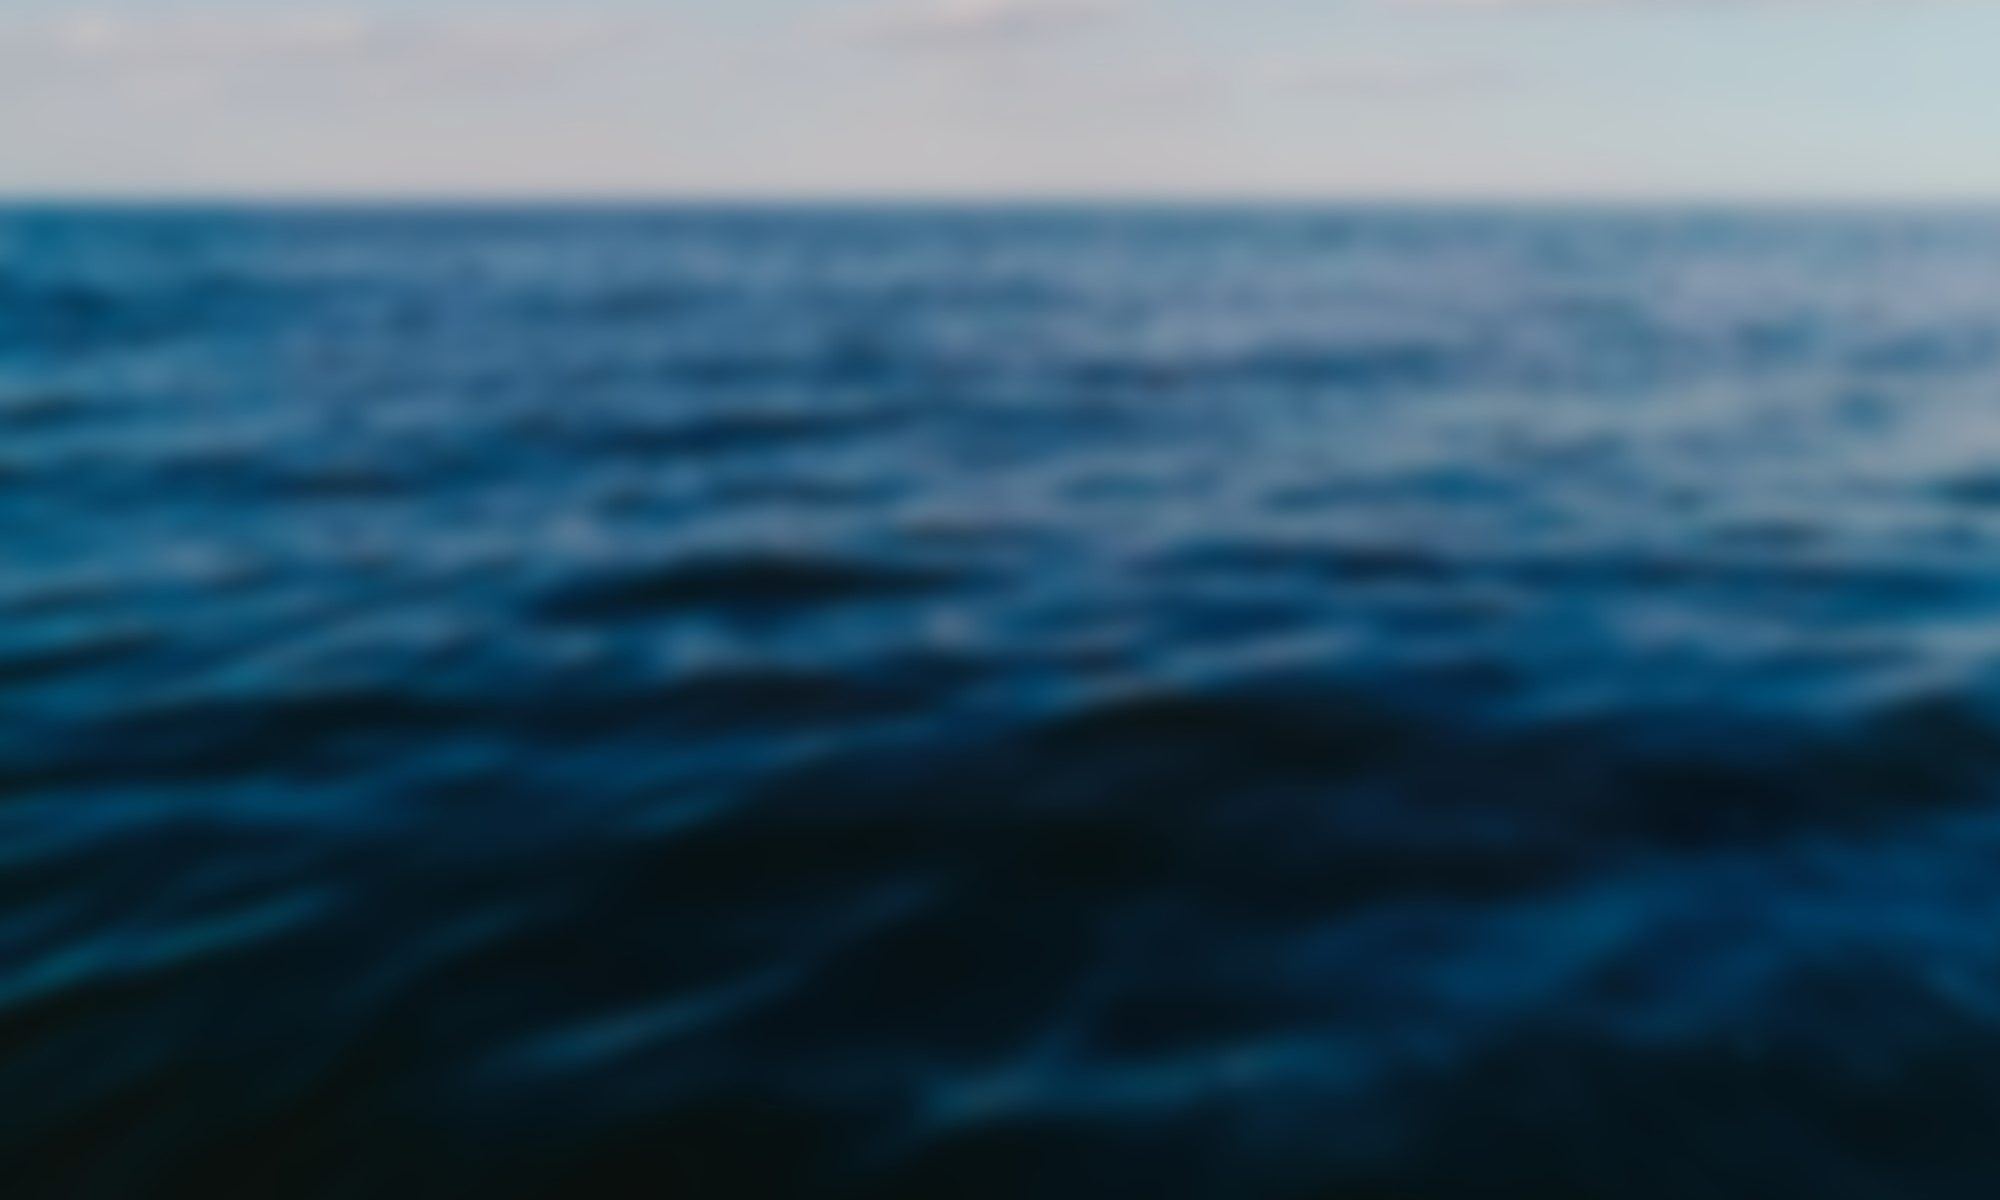 blurred photograph of the ocean